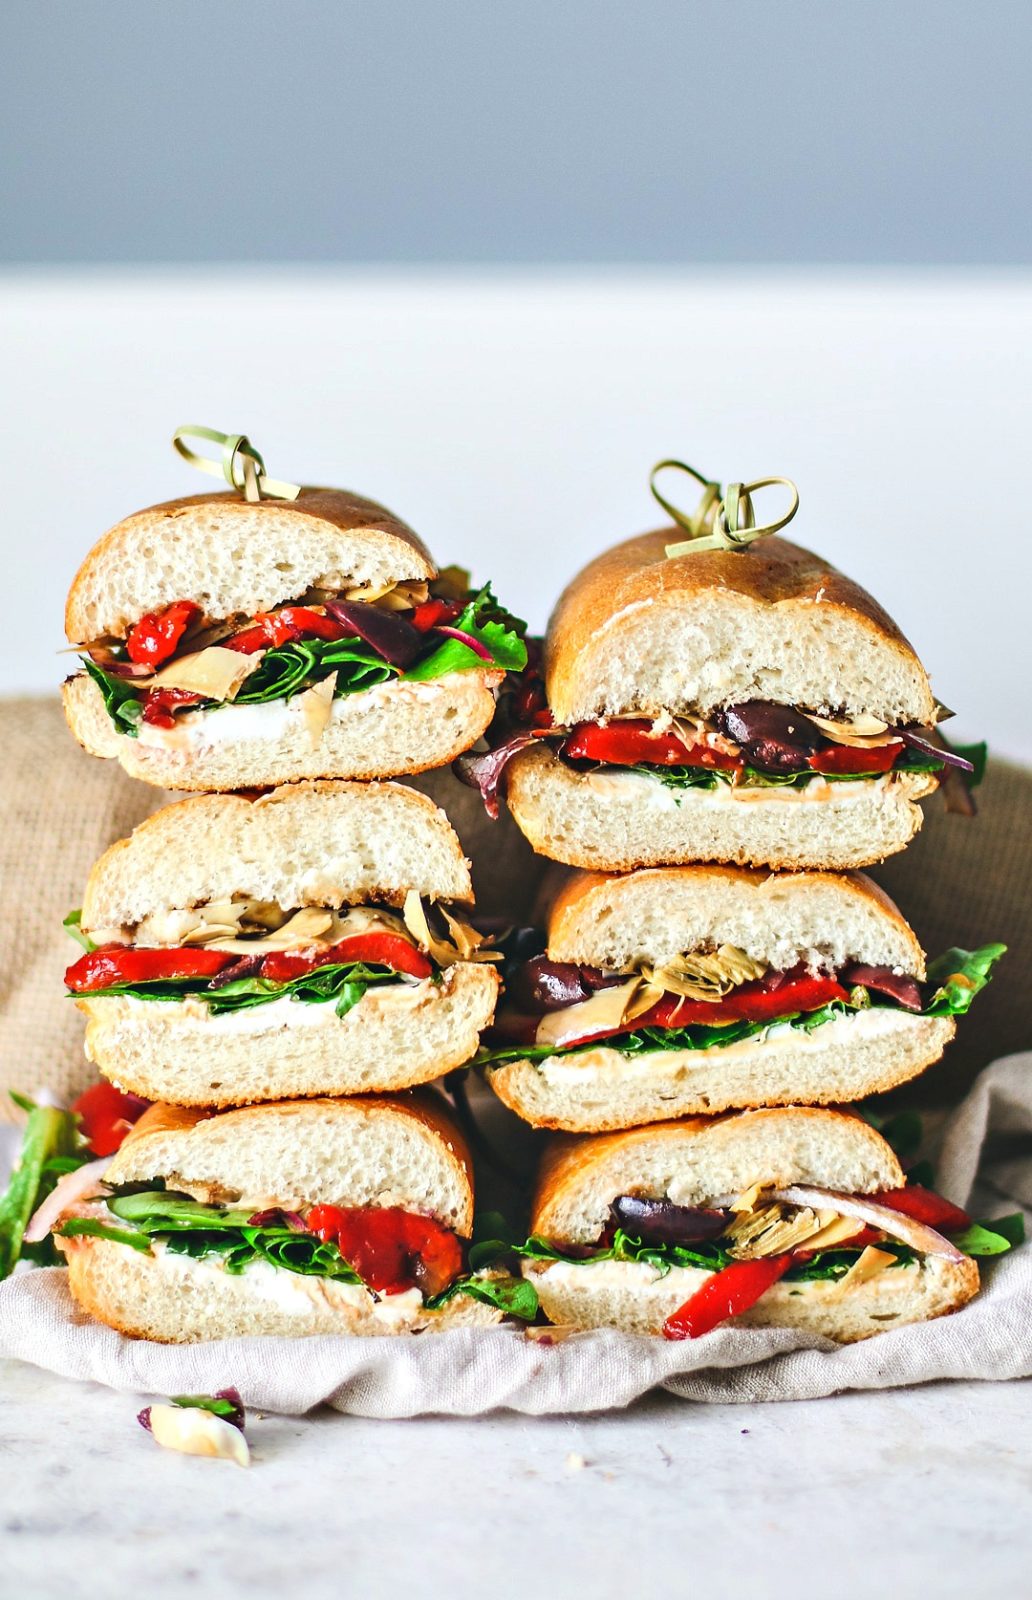 Italian Antipasto Sandwiches cut in halves and stacked.